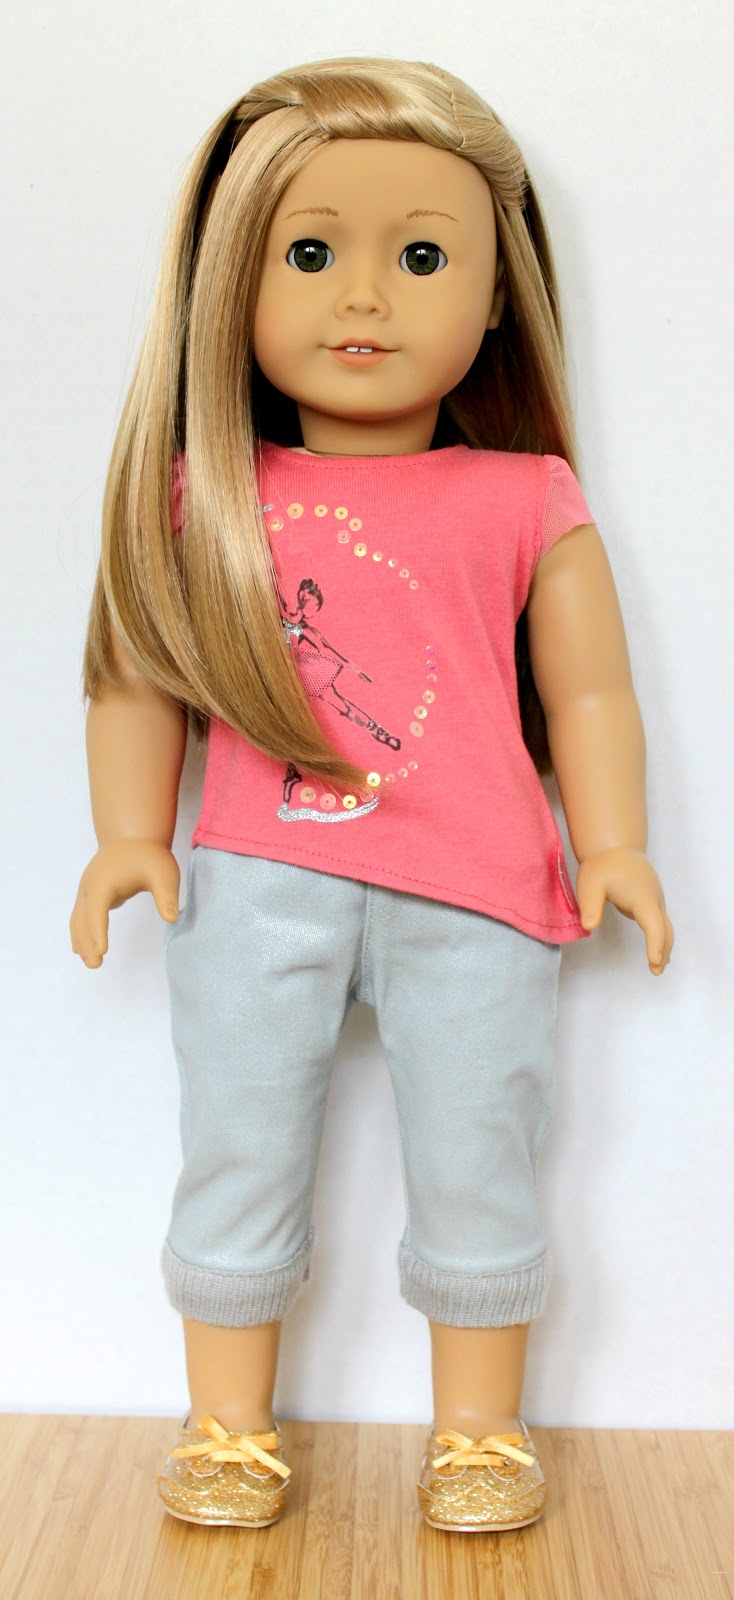 The Doll Wardrobe: Meet Isabelle!